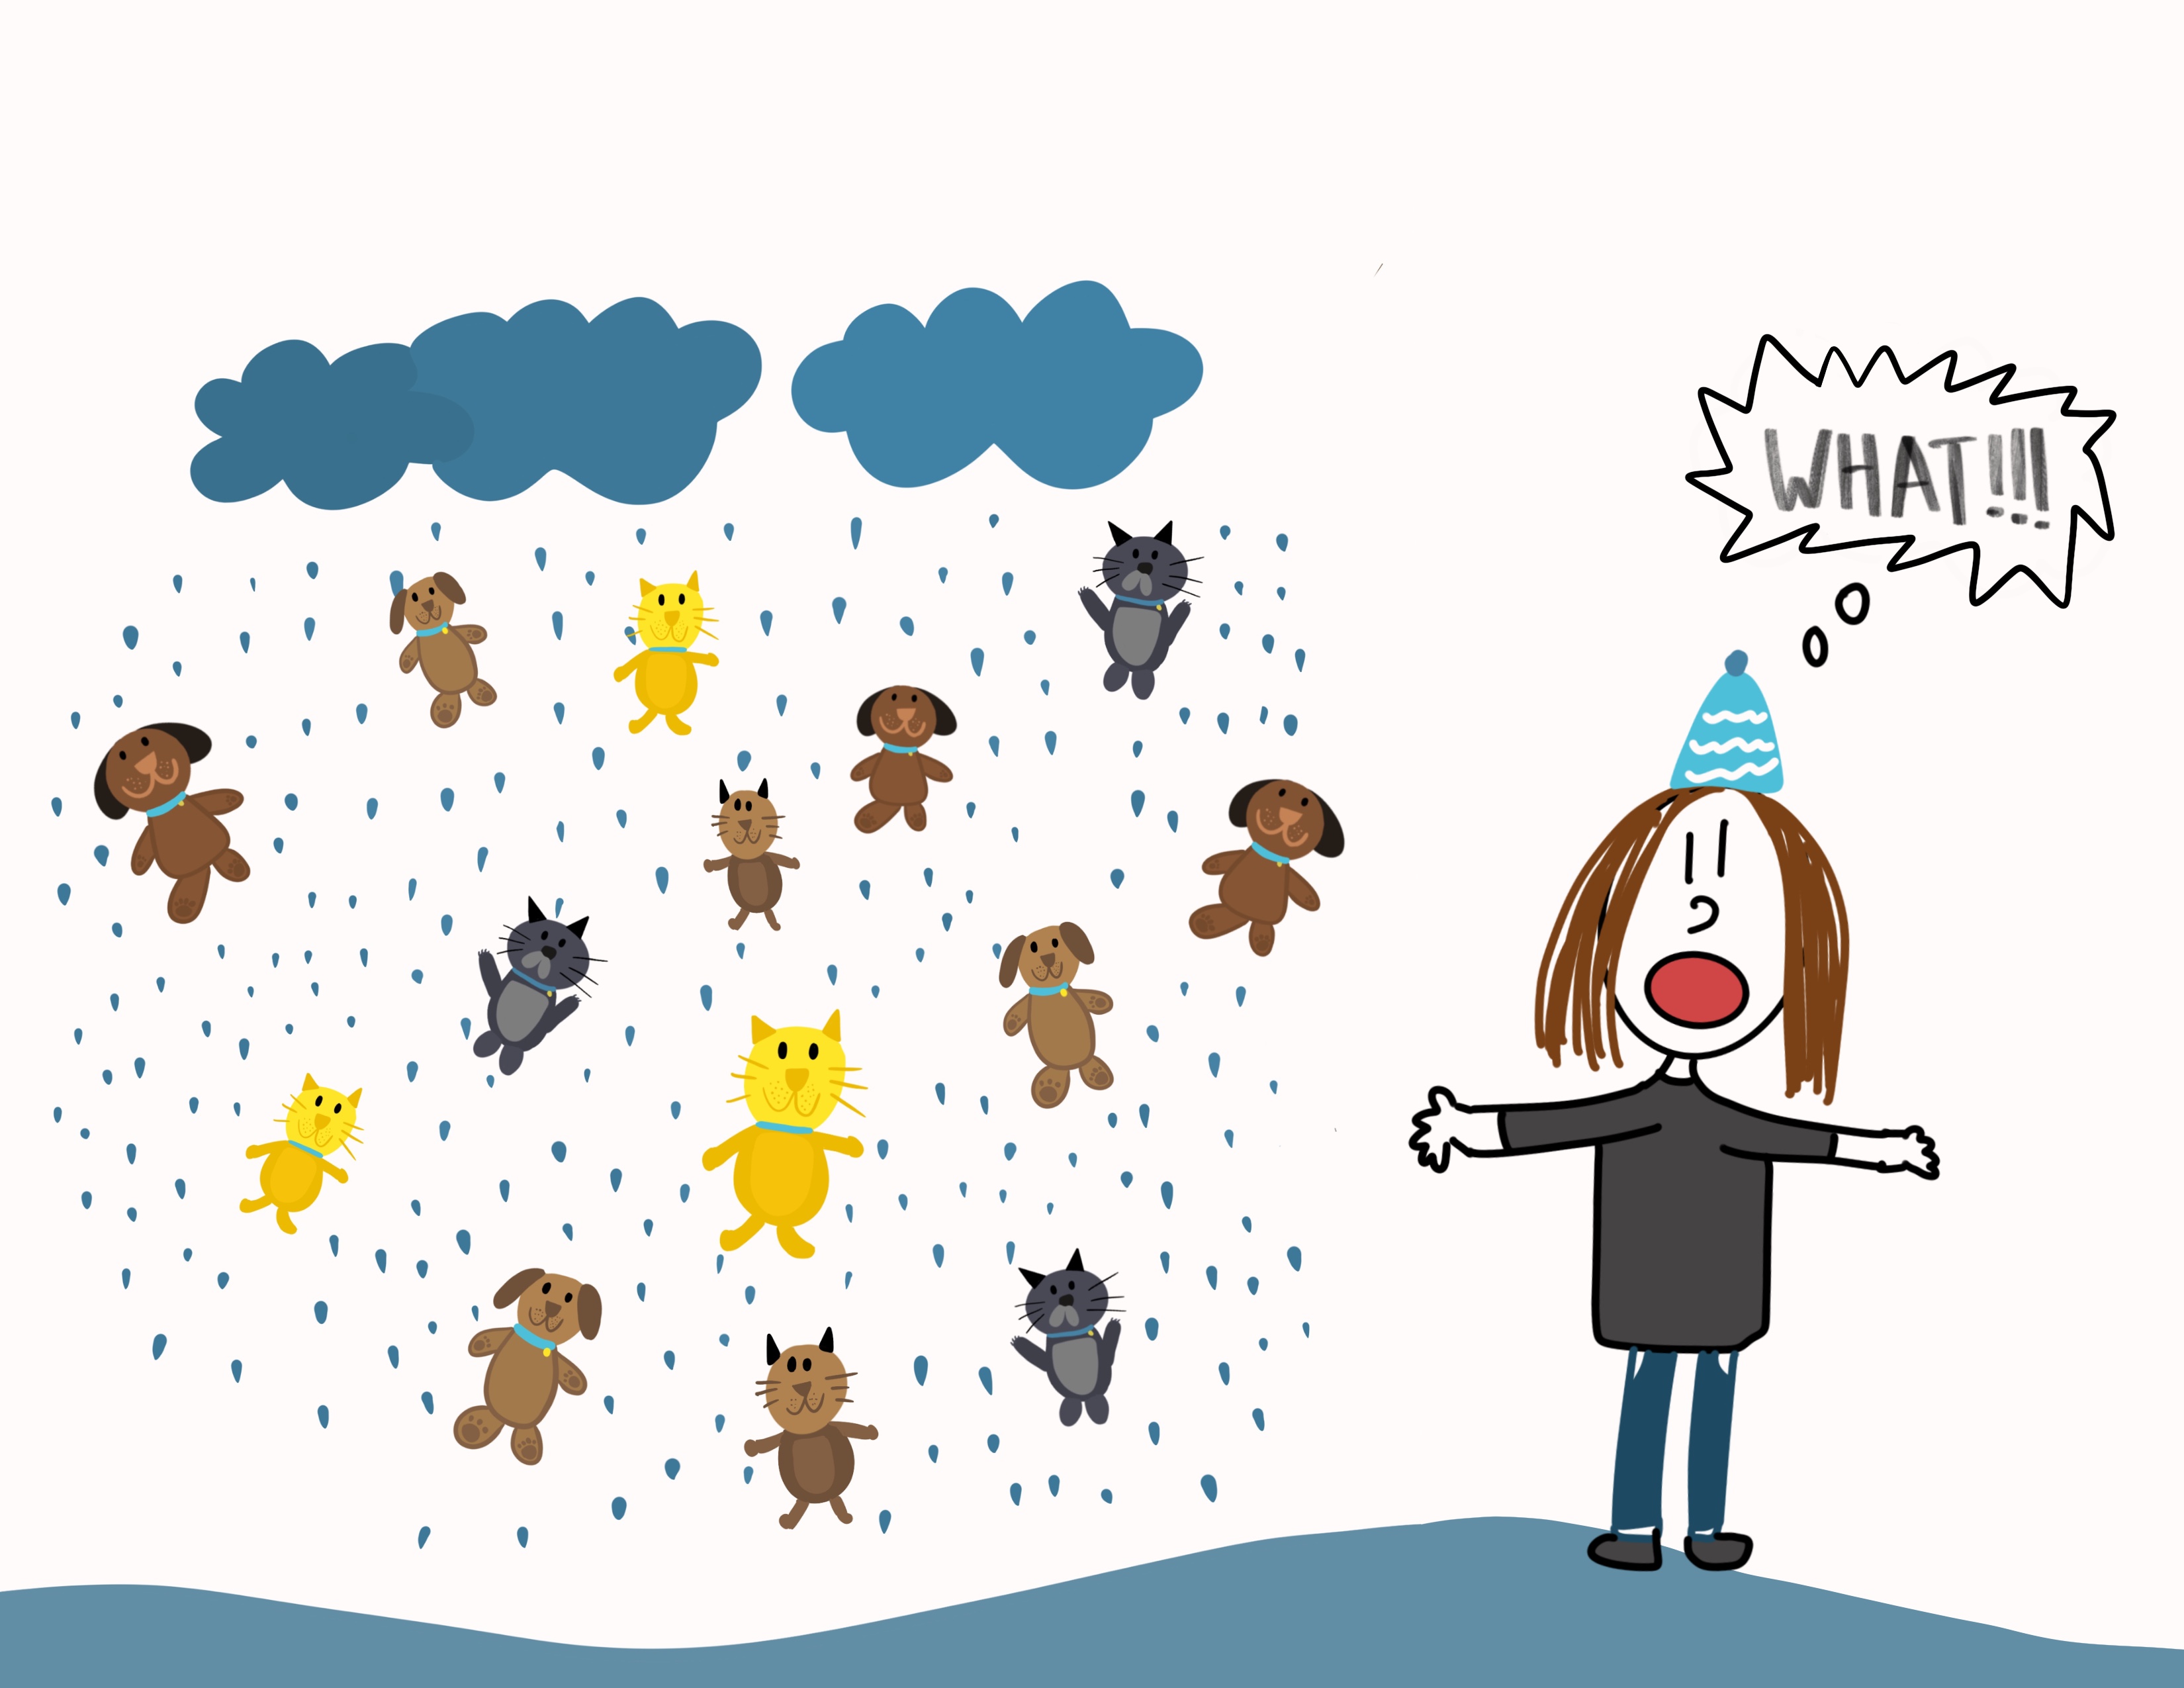 Its-Raining-Cats-and-Dogs.JPG